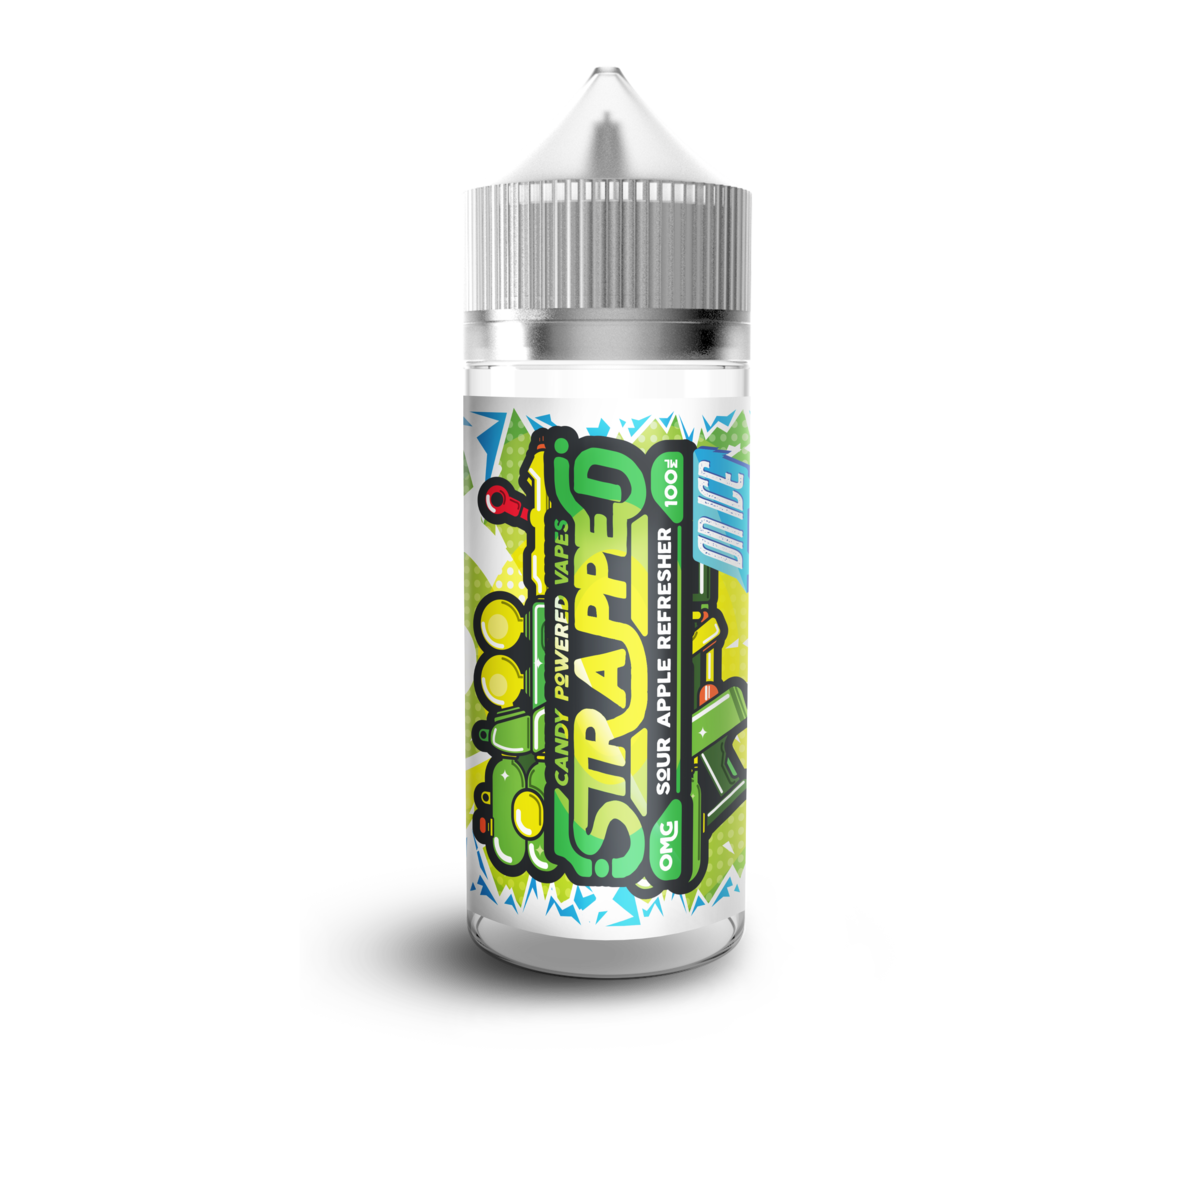 Strapped Sour Apple Refreshers on Ice 0mg Shortfill E-Liquid